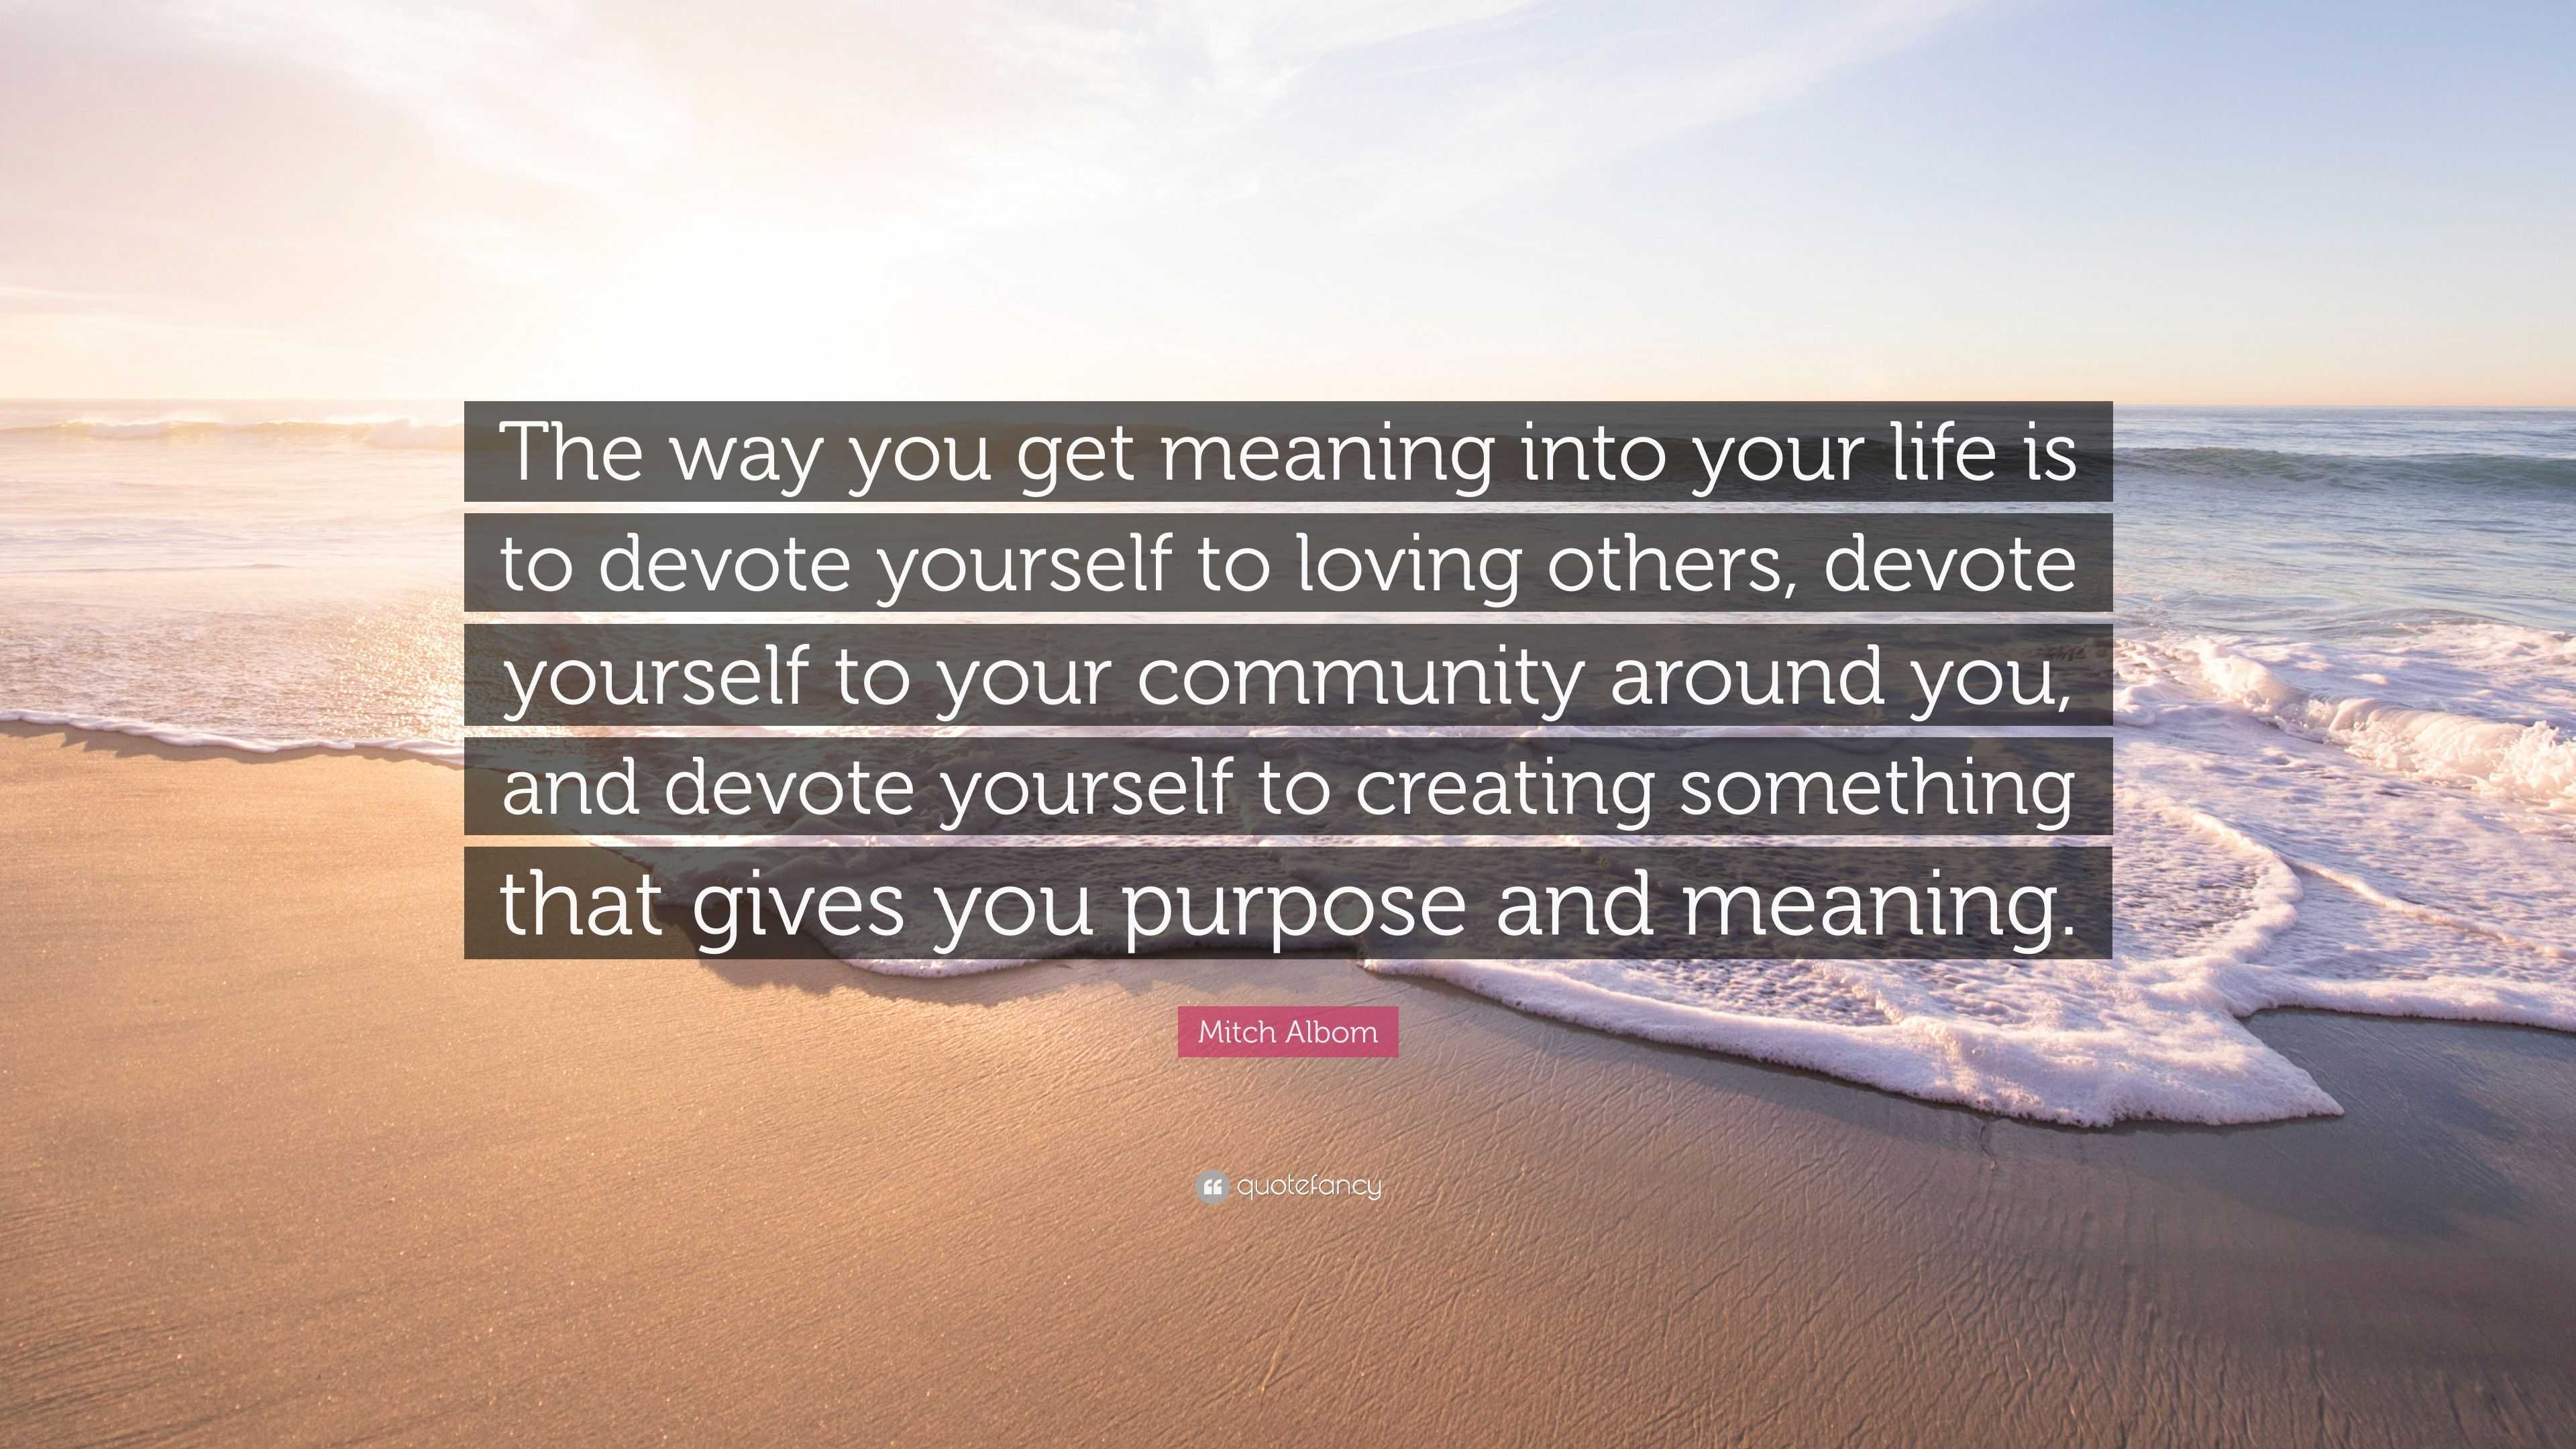 Mitch Albom Quote “the Way You Get Meaning Into Your Life Is To Devote